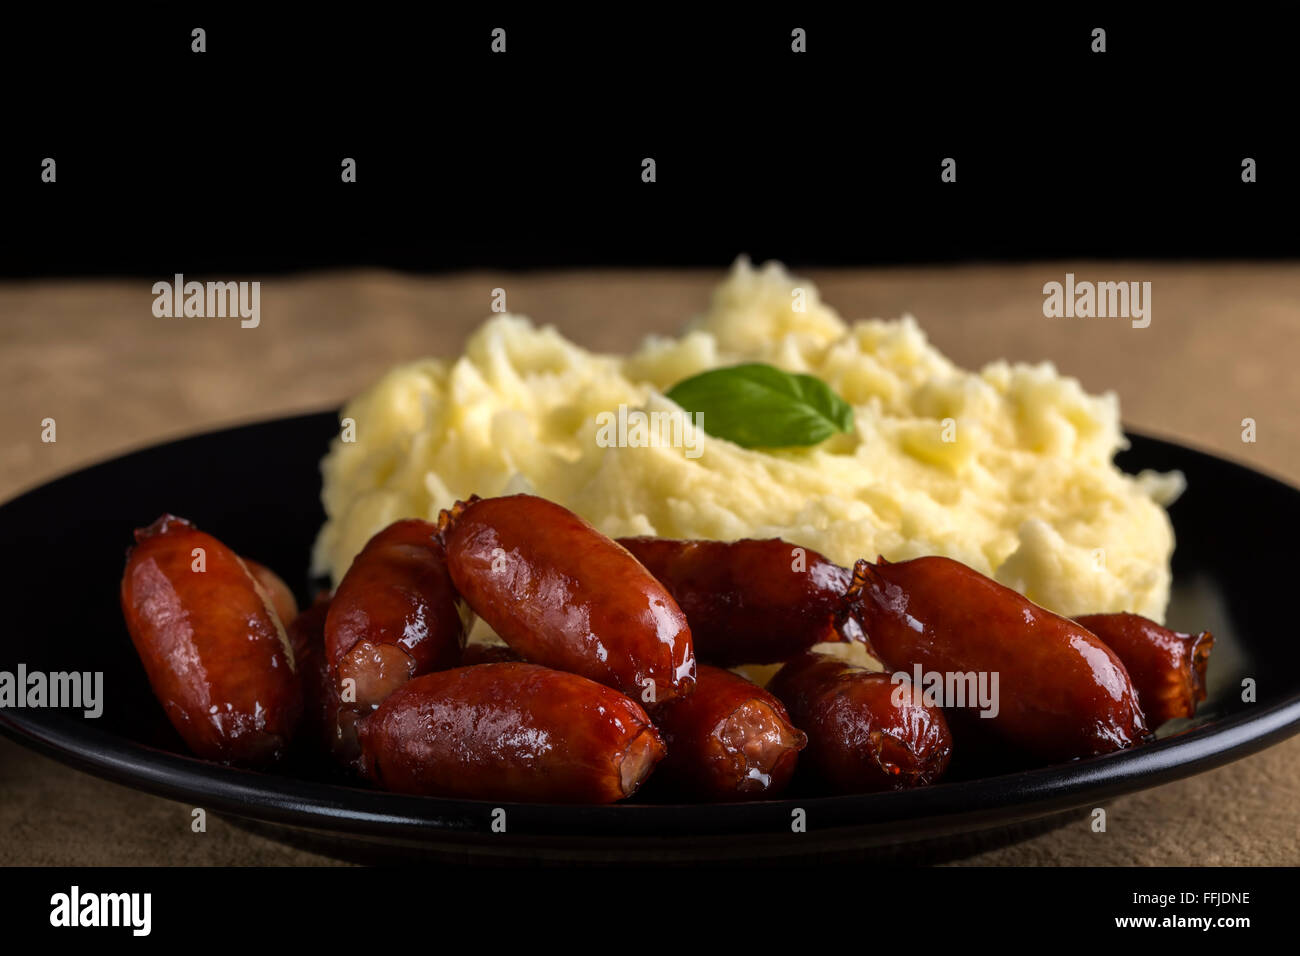 Sausage with mashed potatoes on dark plate Stock Photo